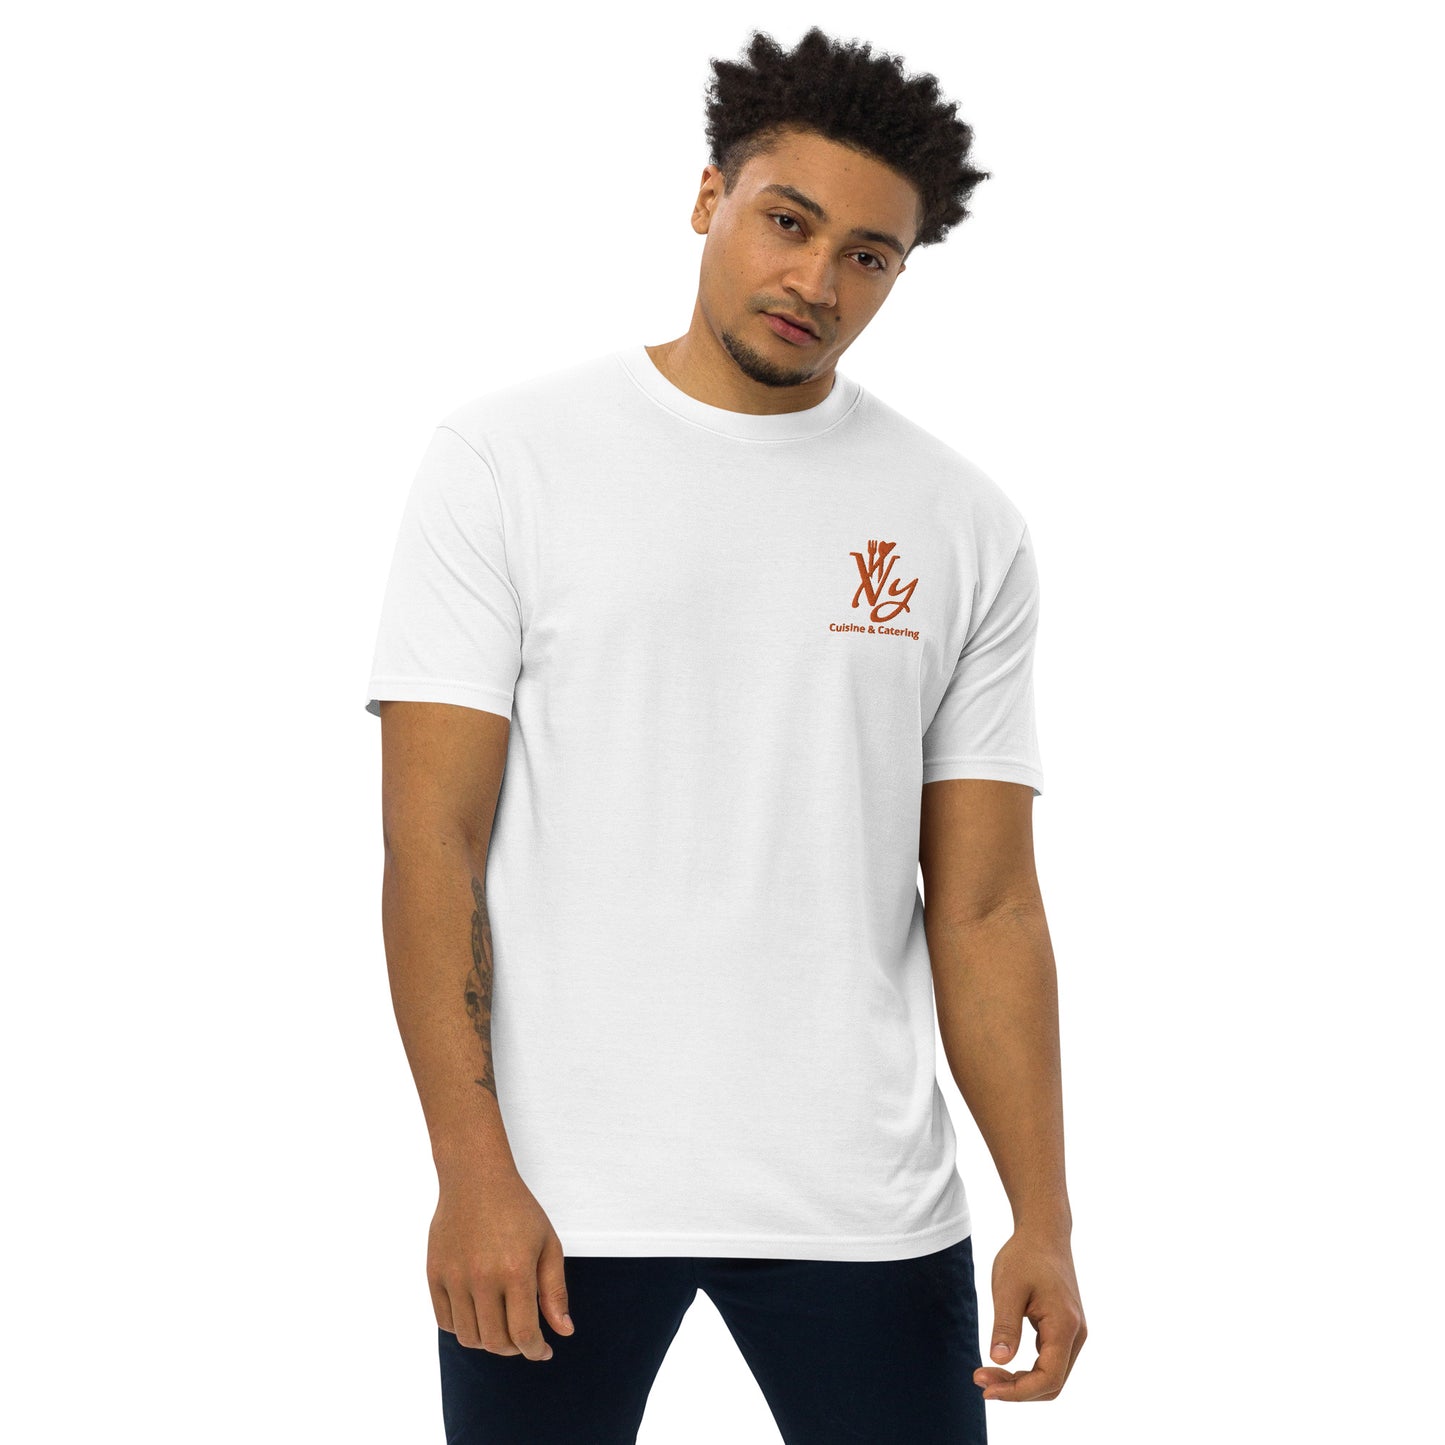 Ivy Cuisine & Catering Men’s premium embroidered heavyweight tee